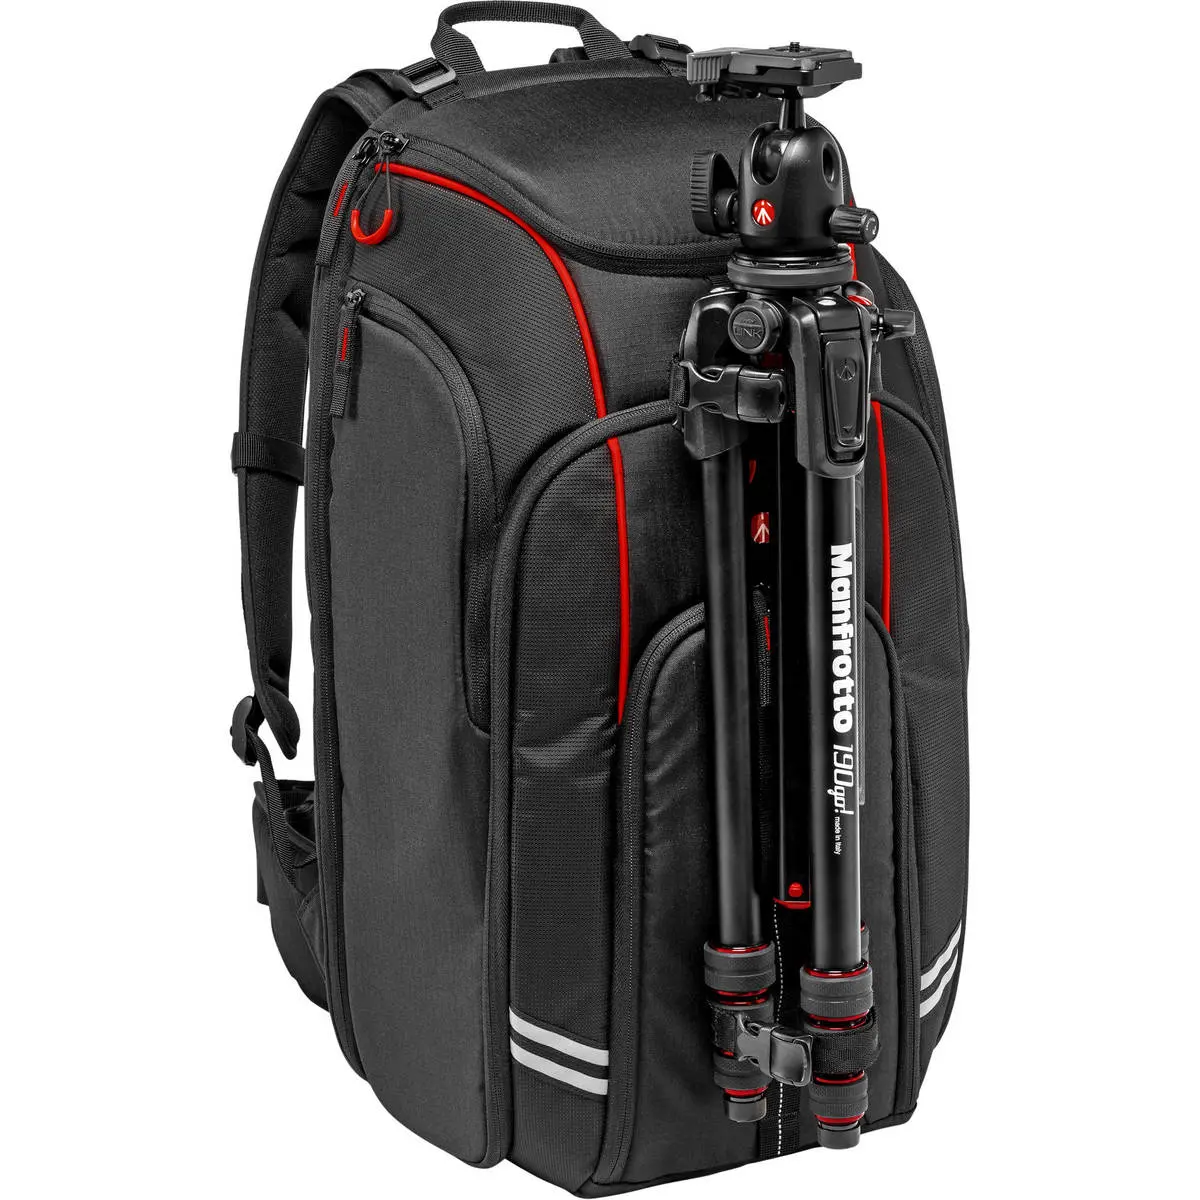 8. Manfrotto D1 Drone Backpack for DJI (MB BP-D1) Drone